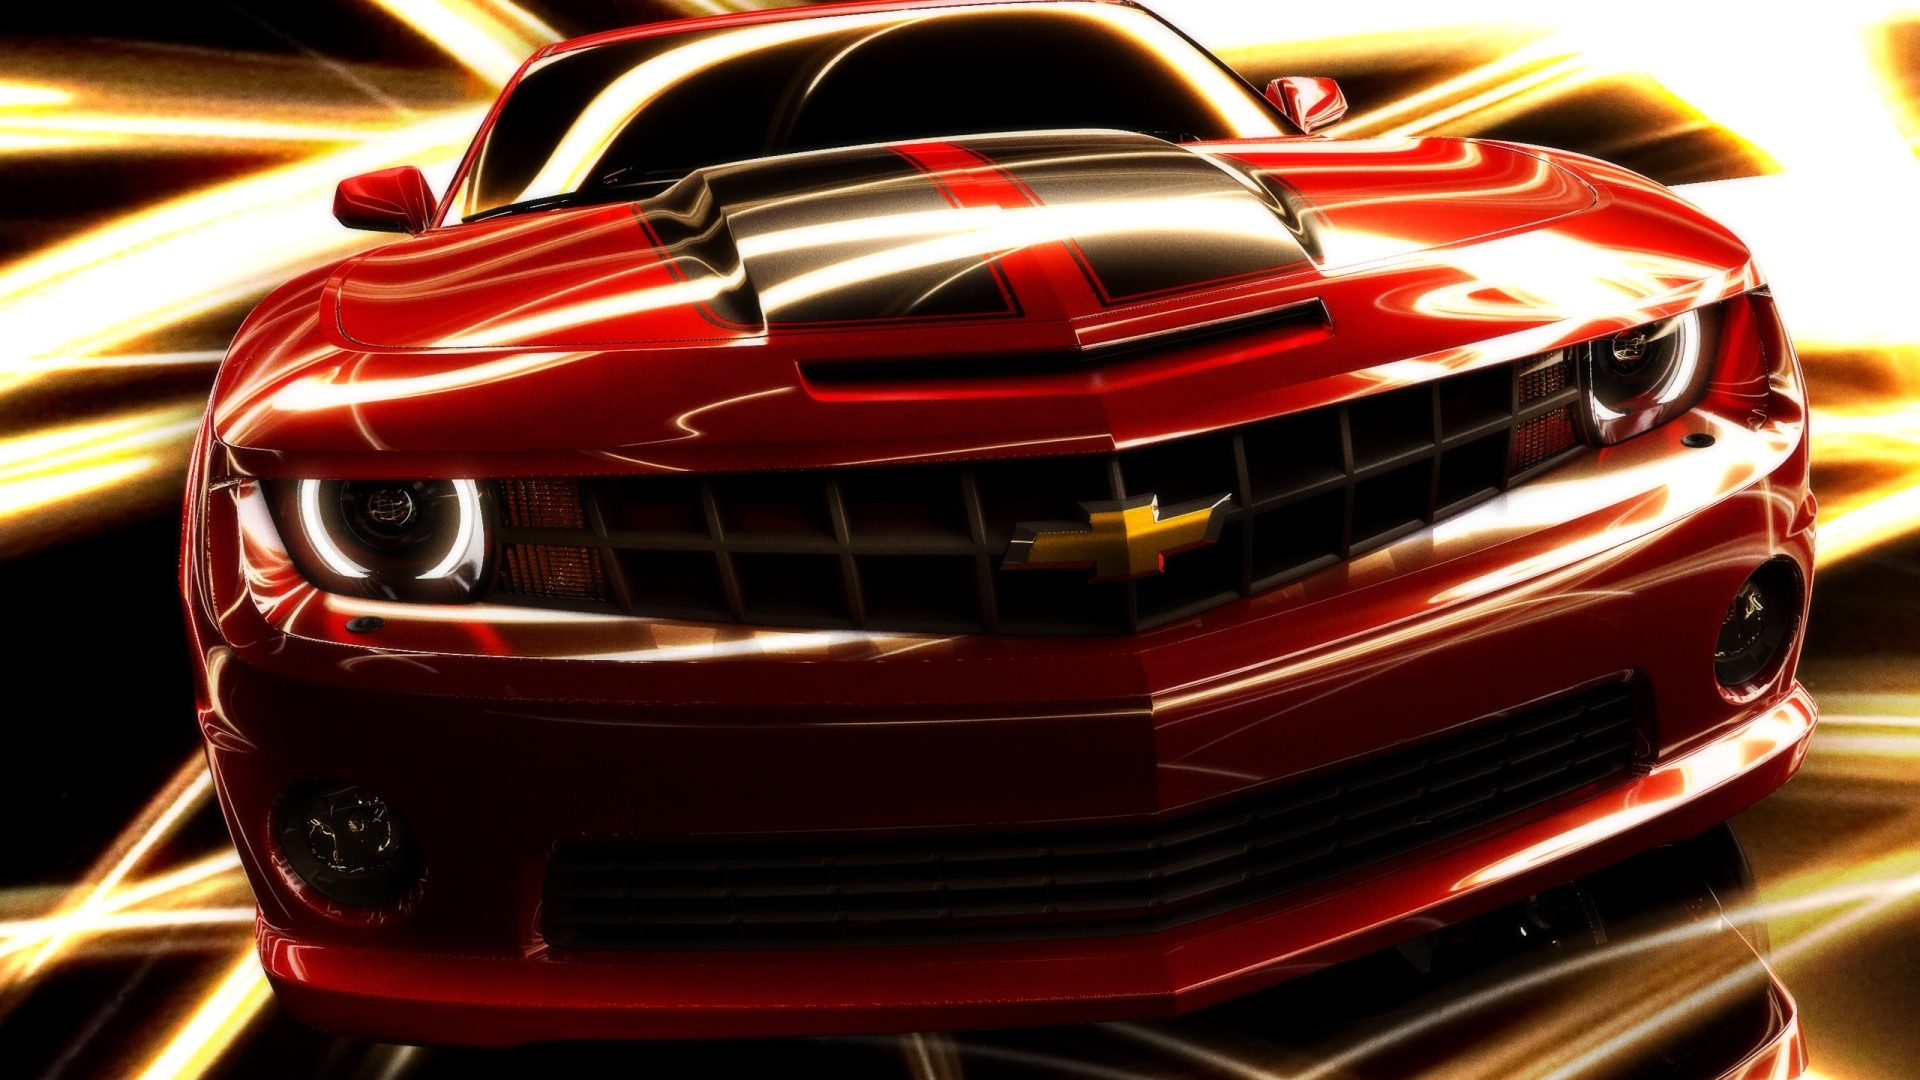 Fire Cool Cars Wallpapers  Wallpaper Cave